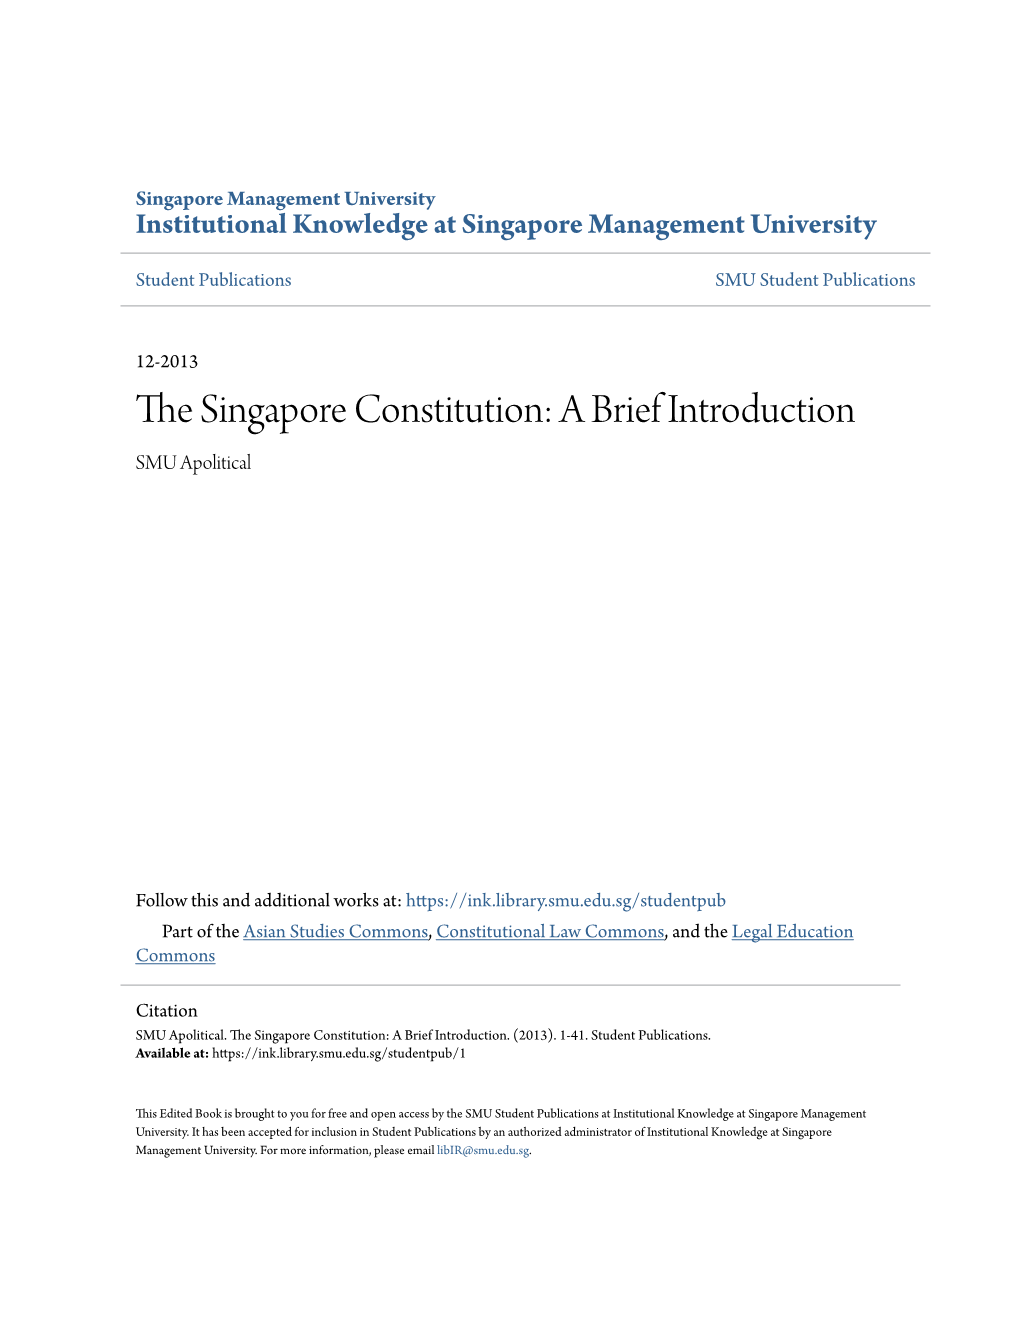 THE SINGAPORE CONSTITUTION: a Brief Introduction